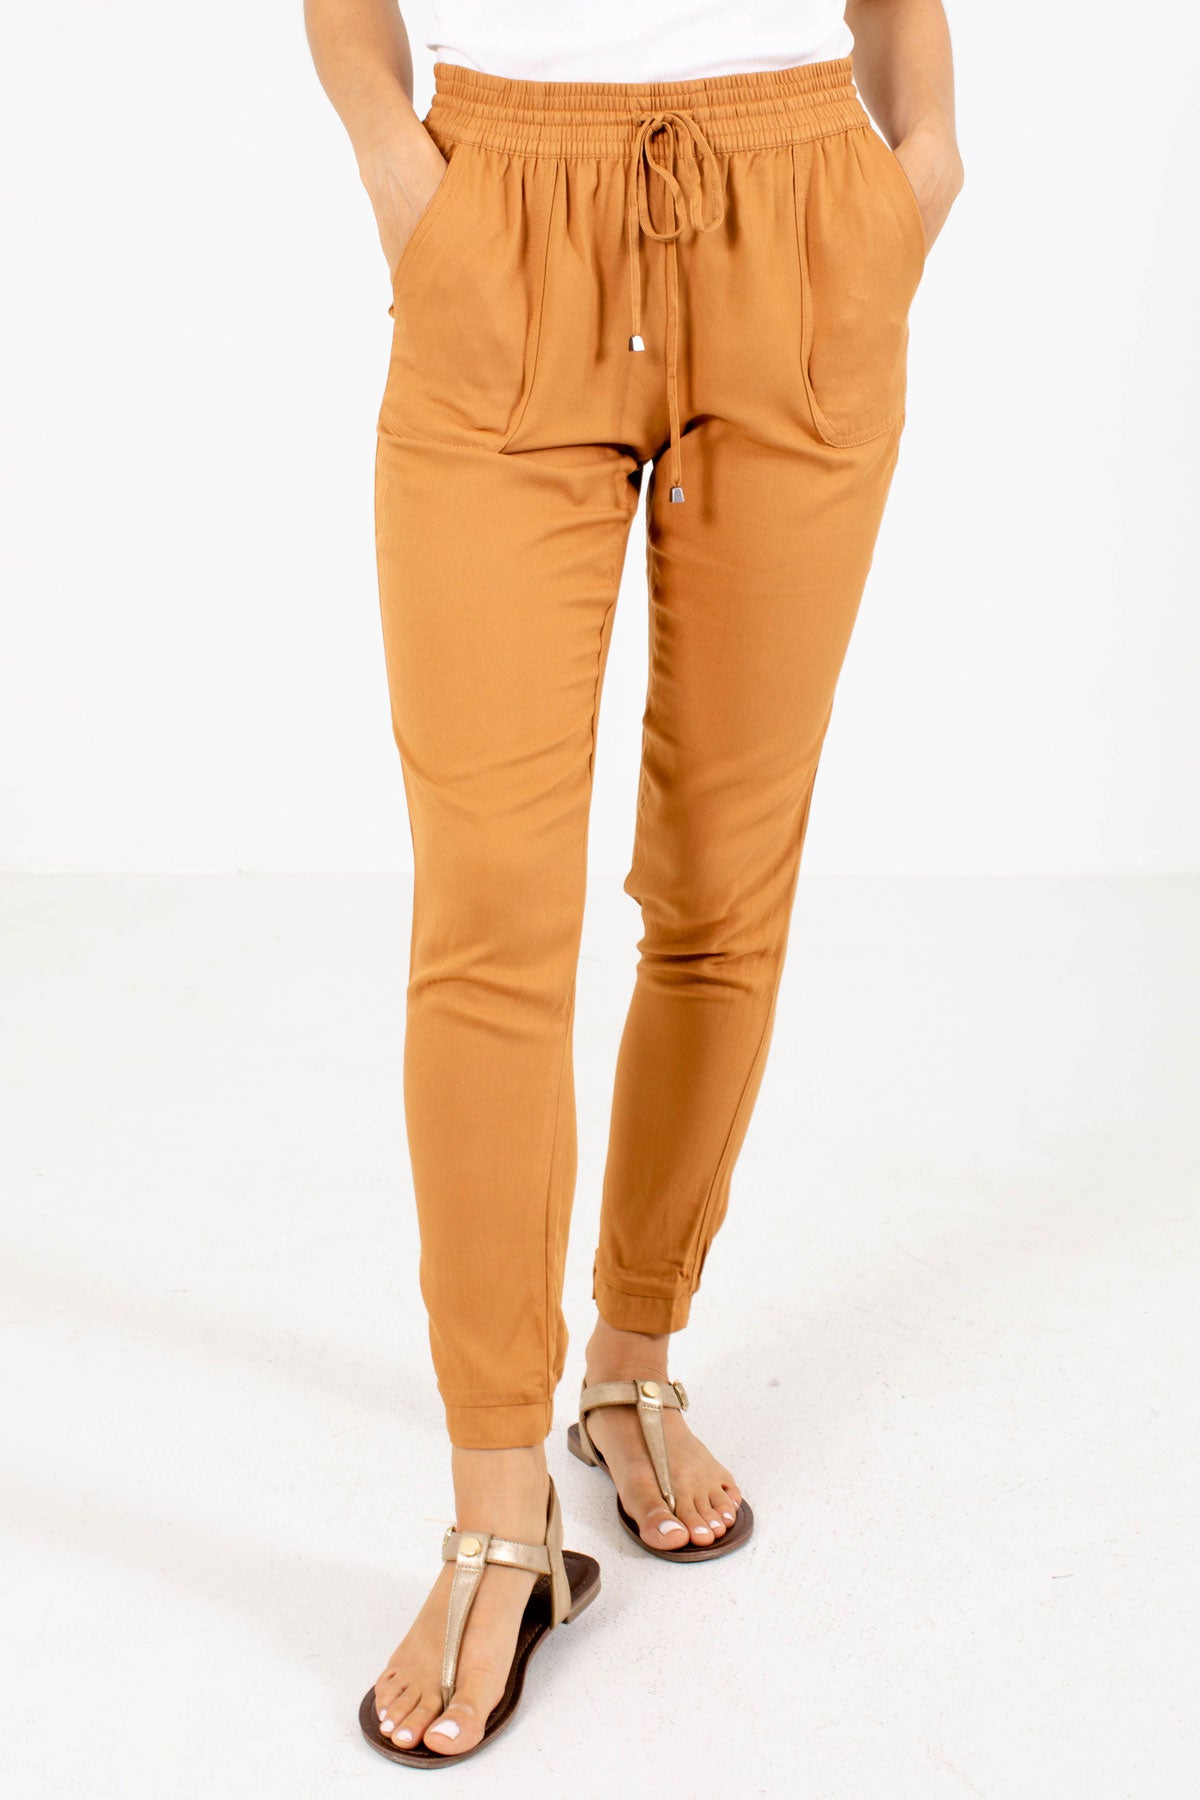 Mustard Elastic Waistband Boutique Joggers for Women